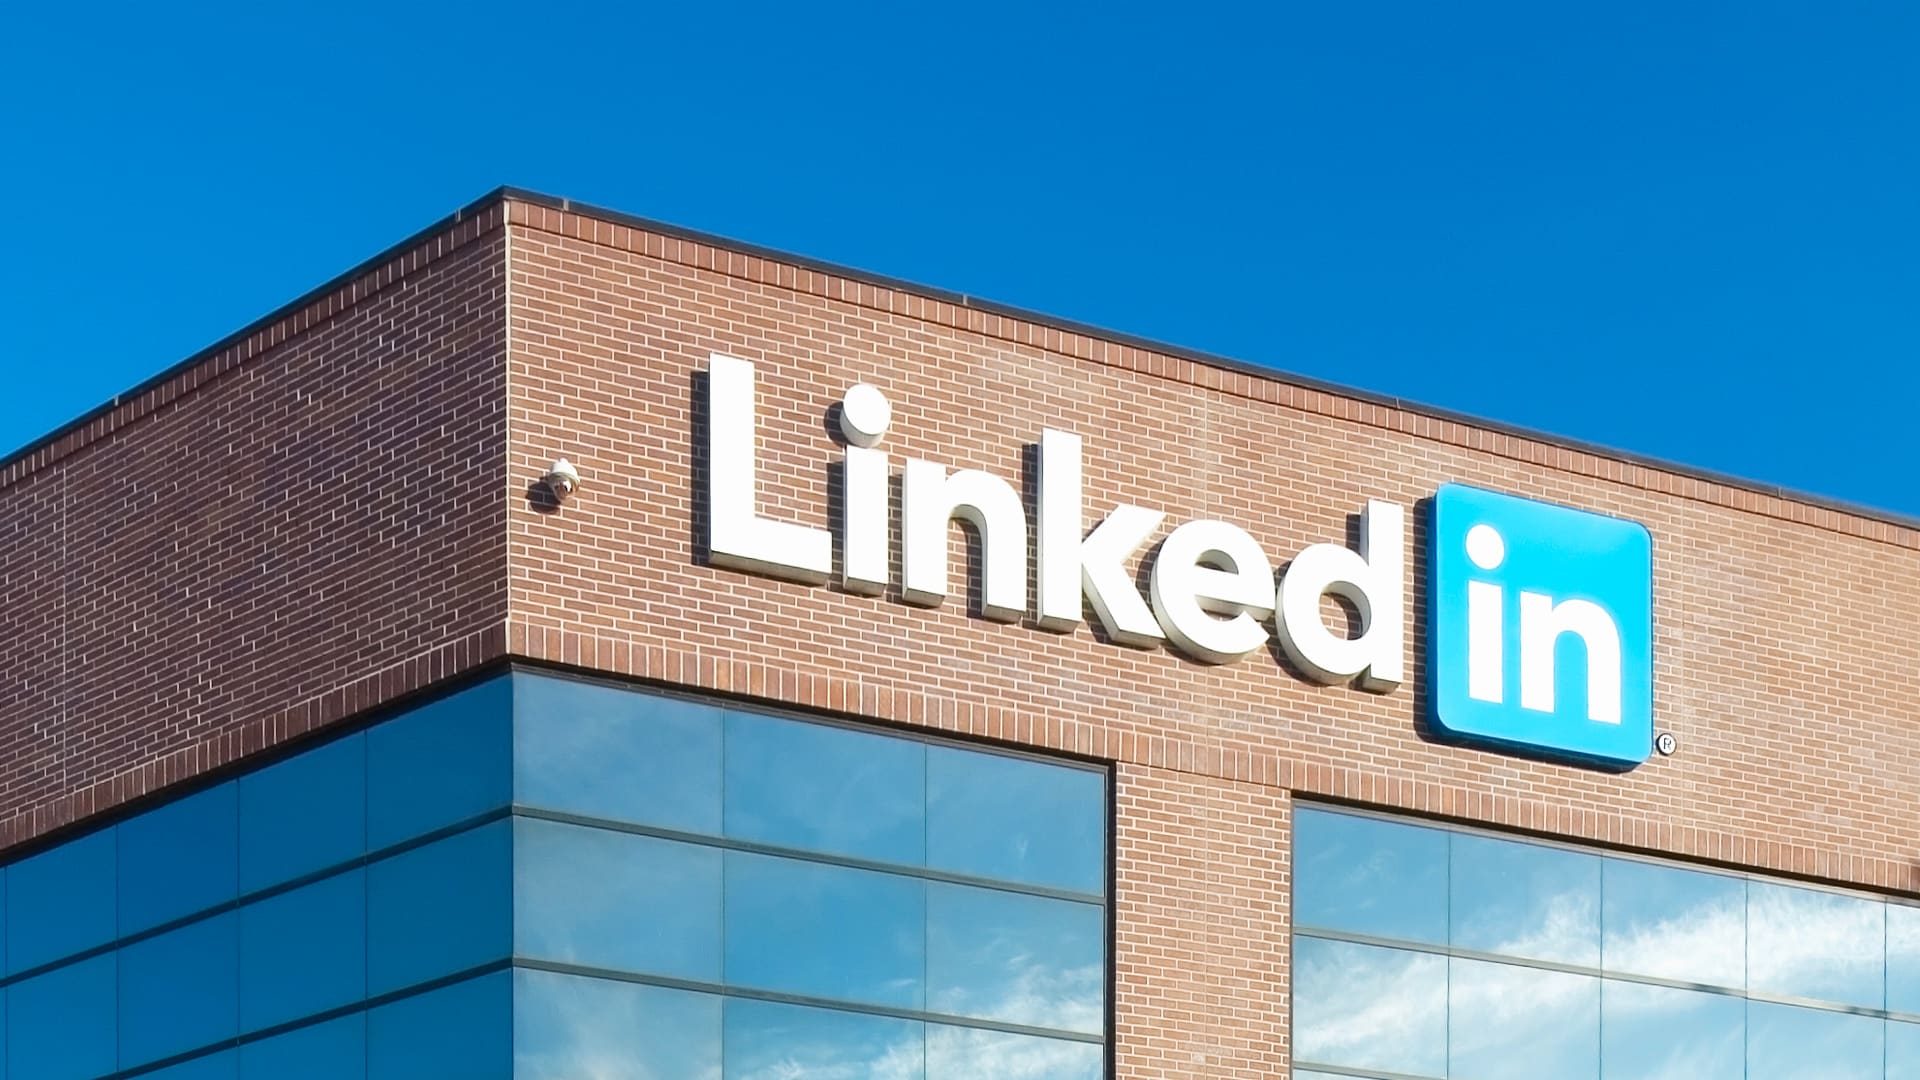 Microsoft-owned LinkedIn is firing over 650 people, total tally this year crosses well over 10,000